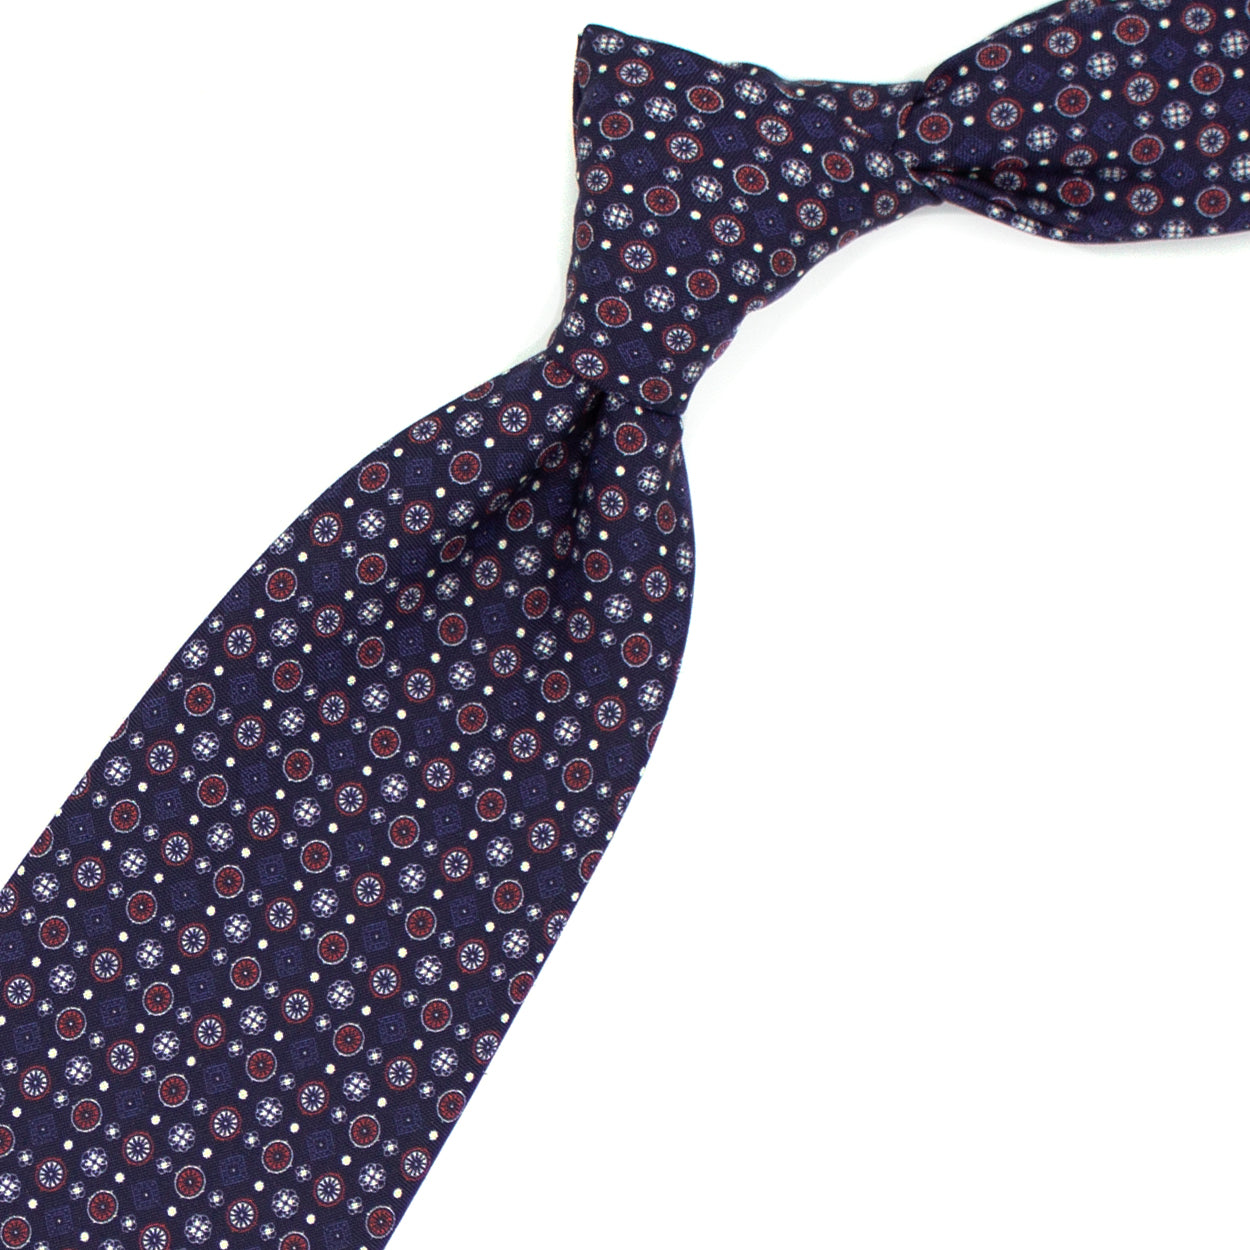 Blue tie with red, white and blue pattern